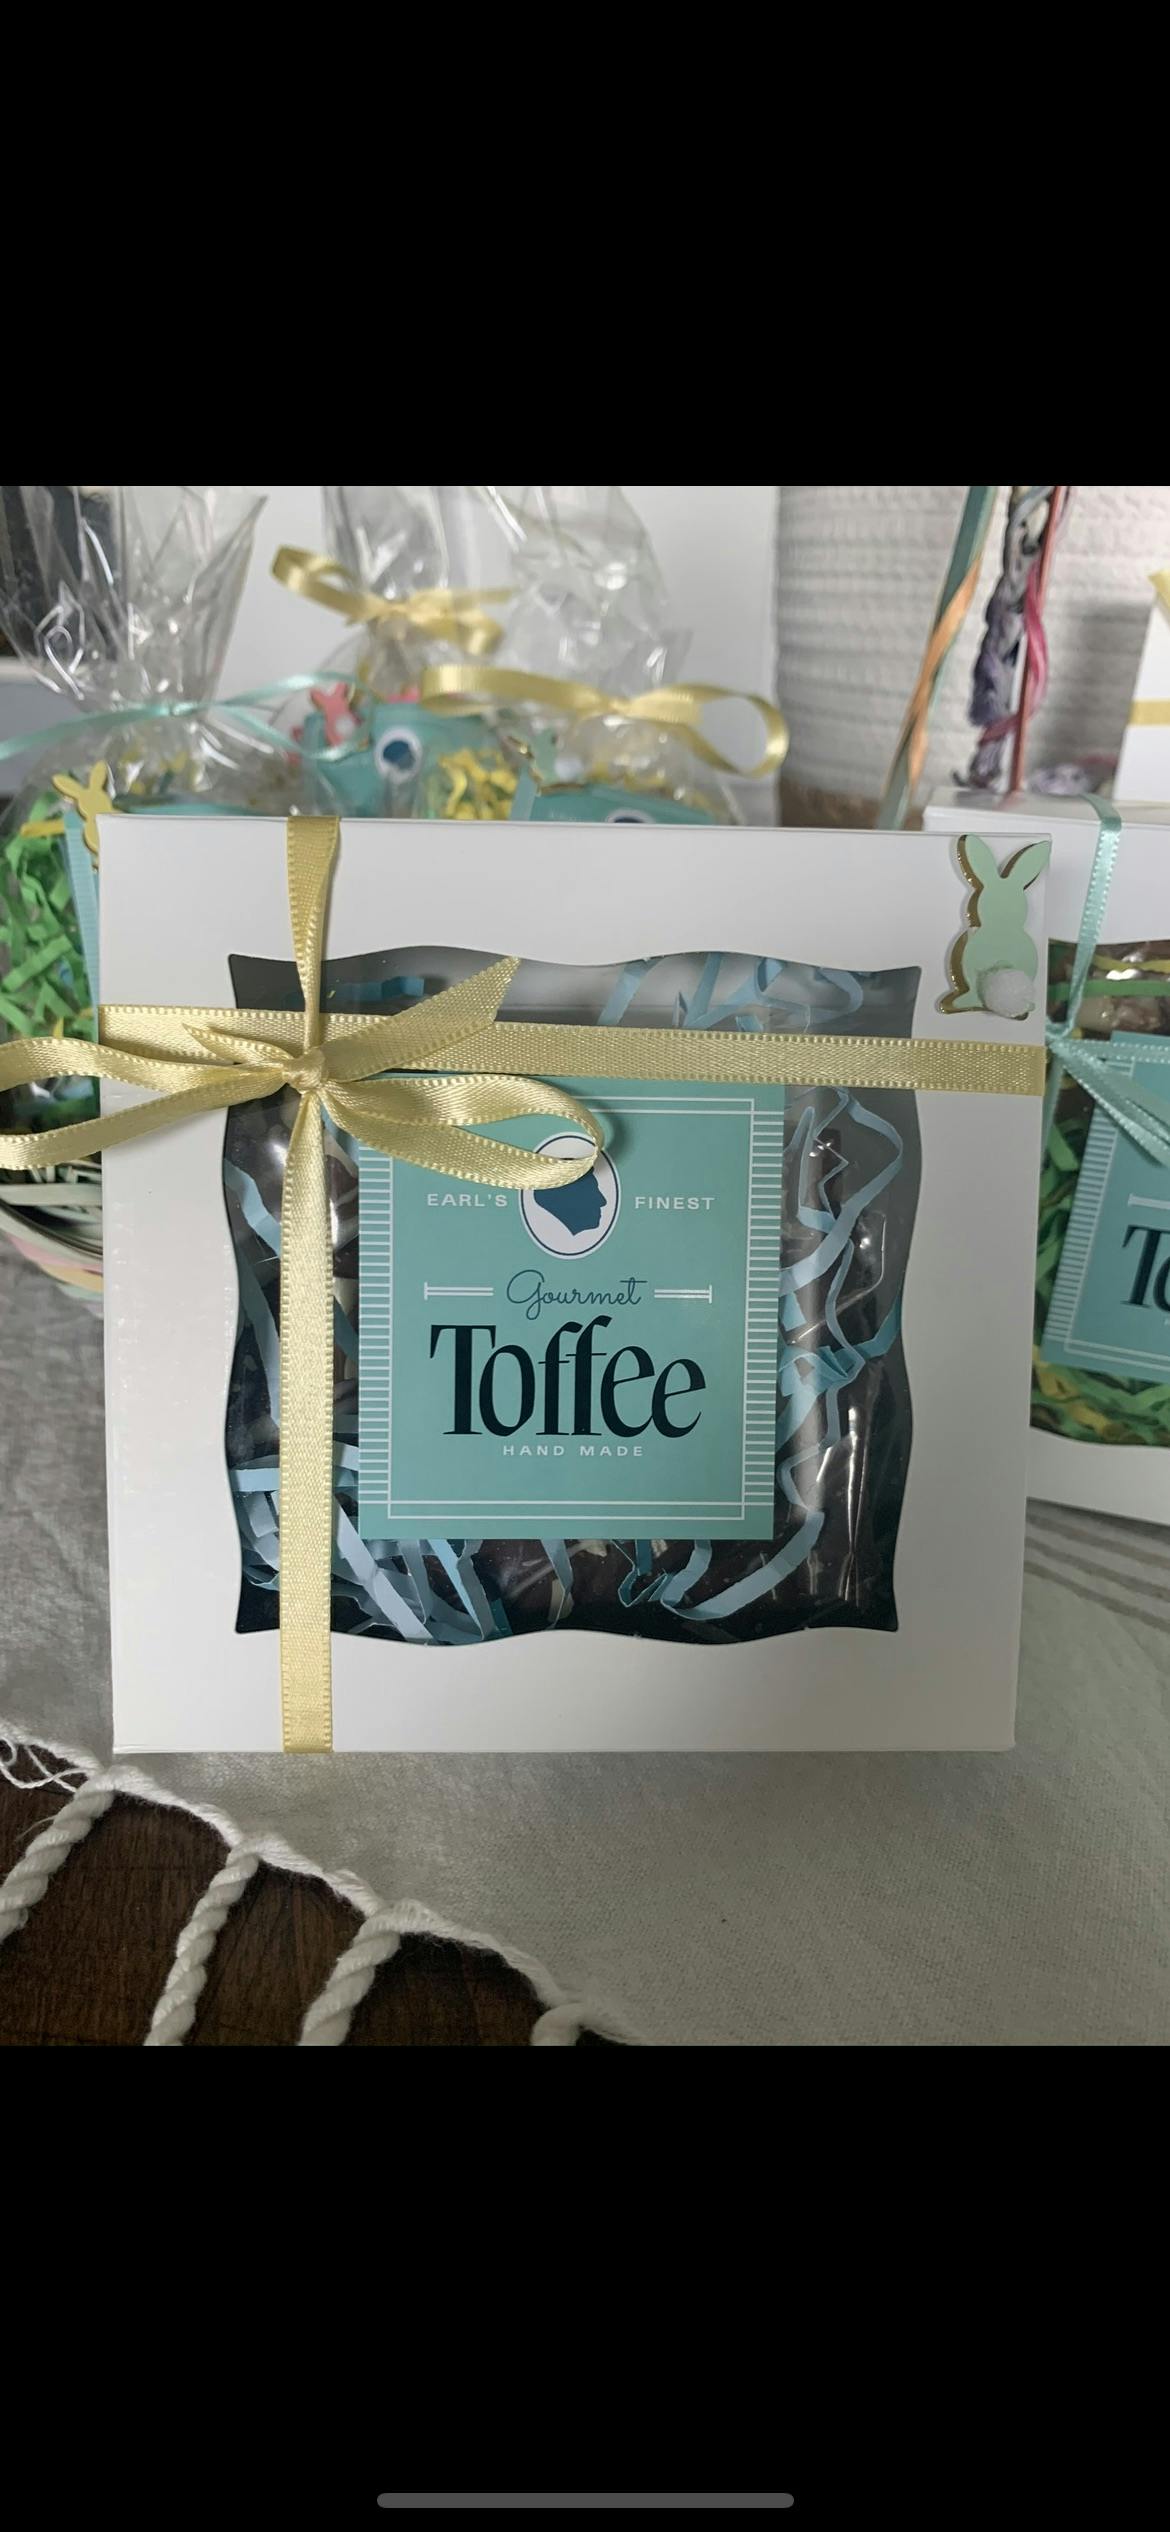 Easter toffee 